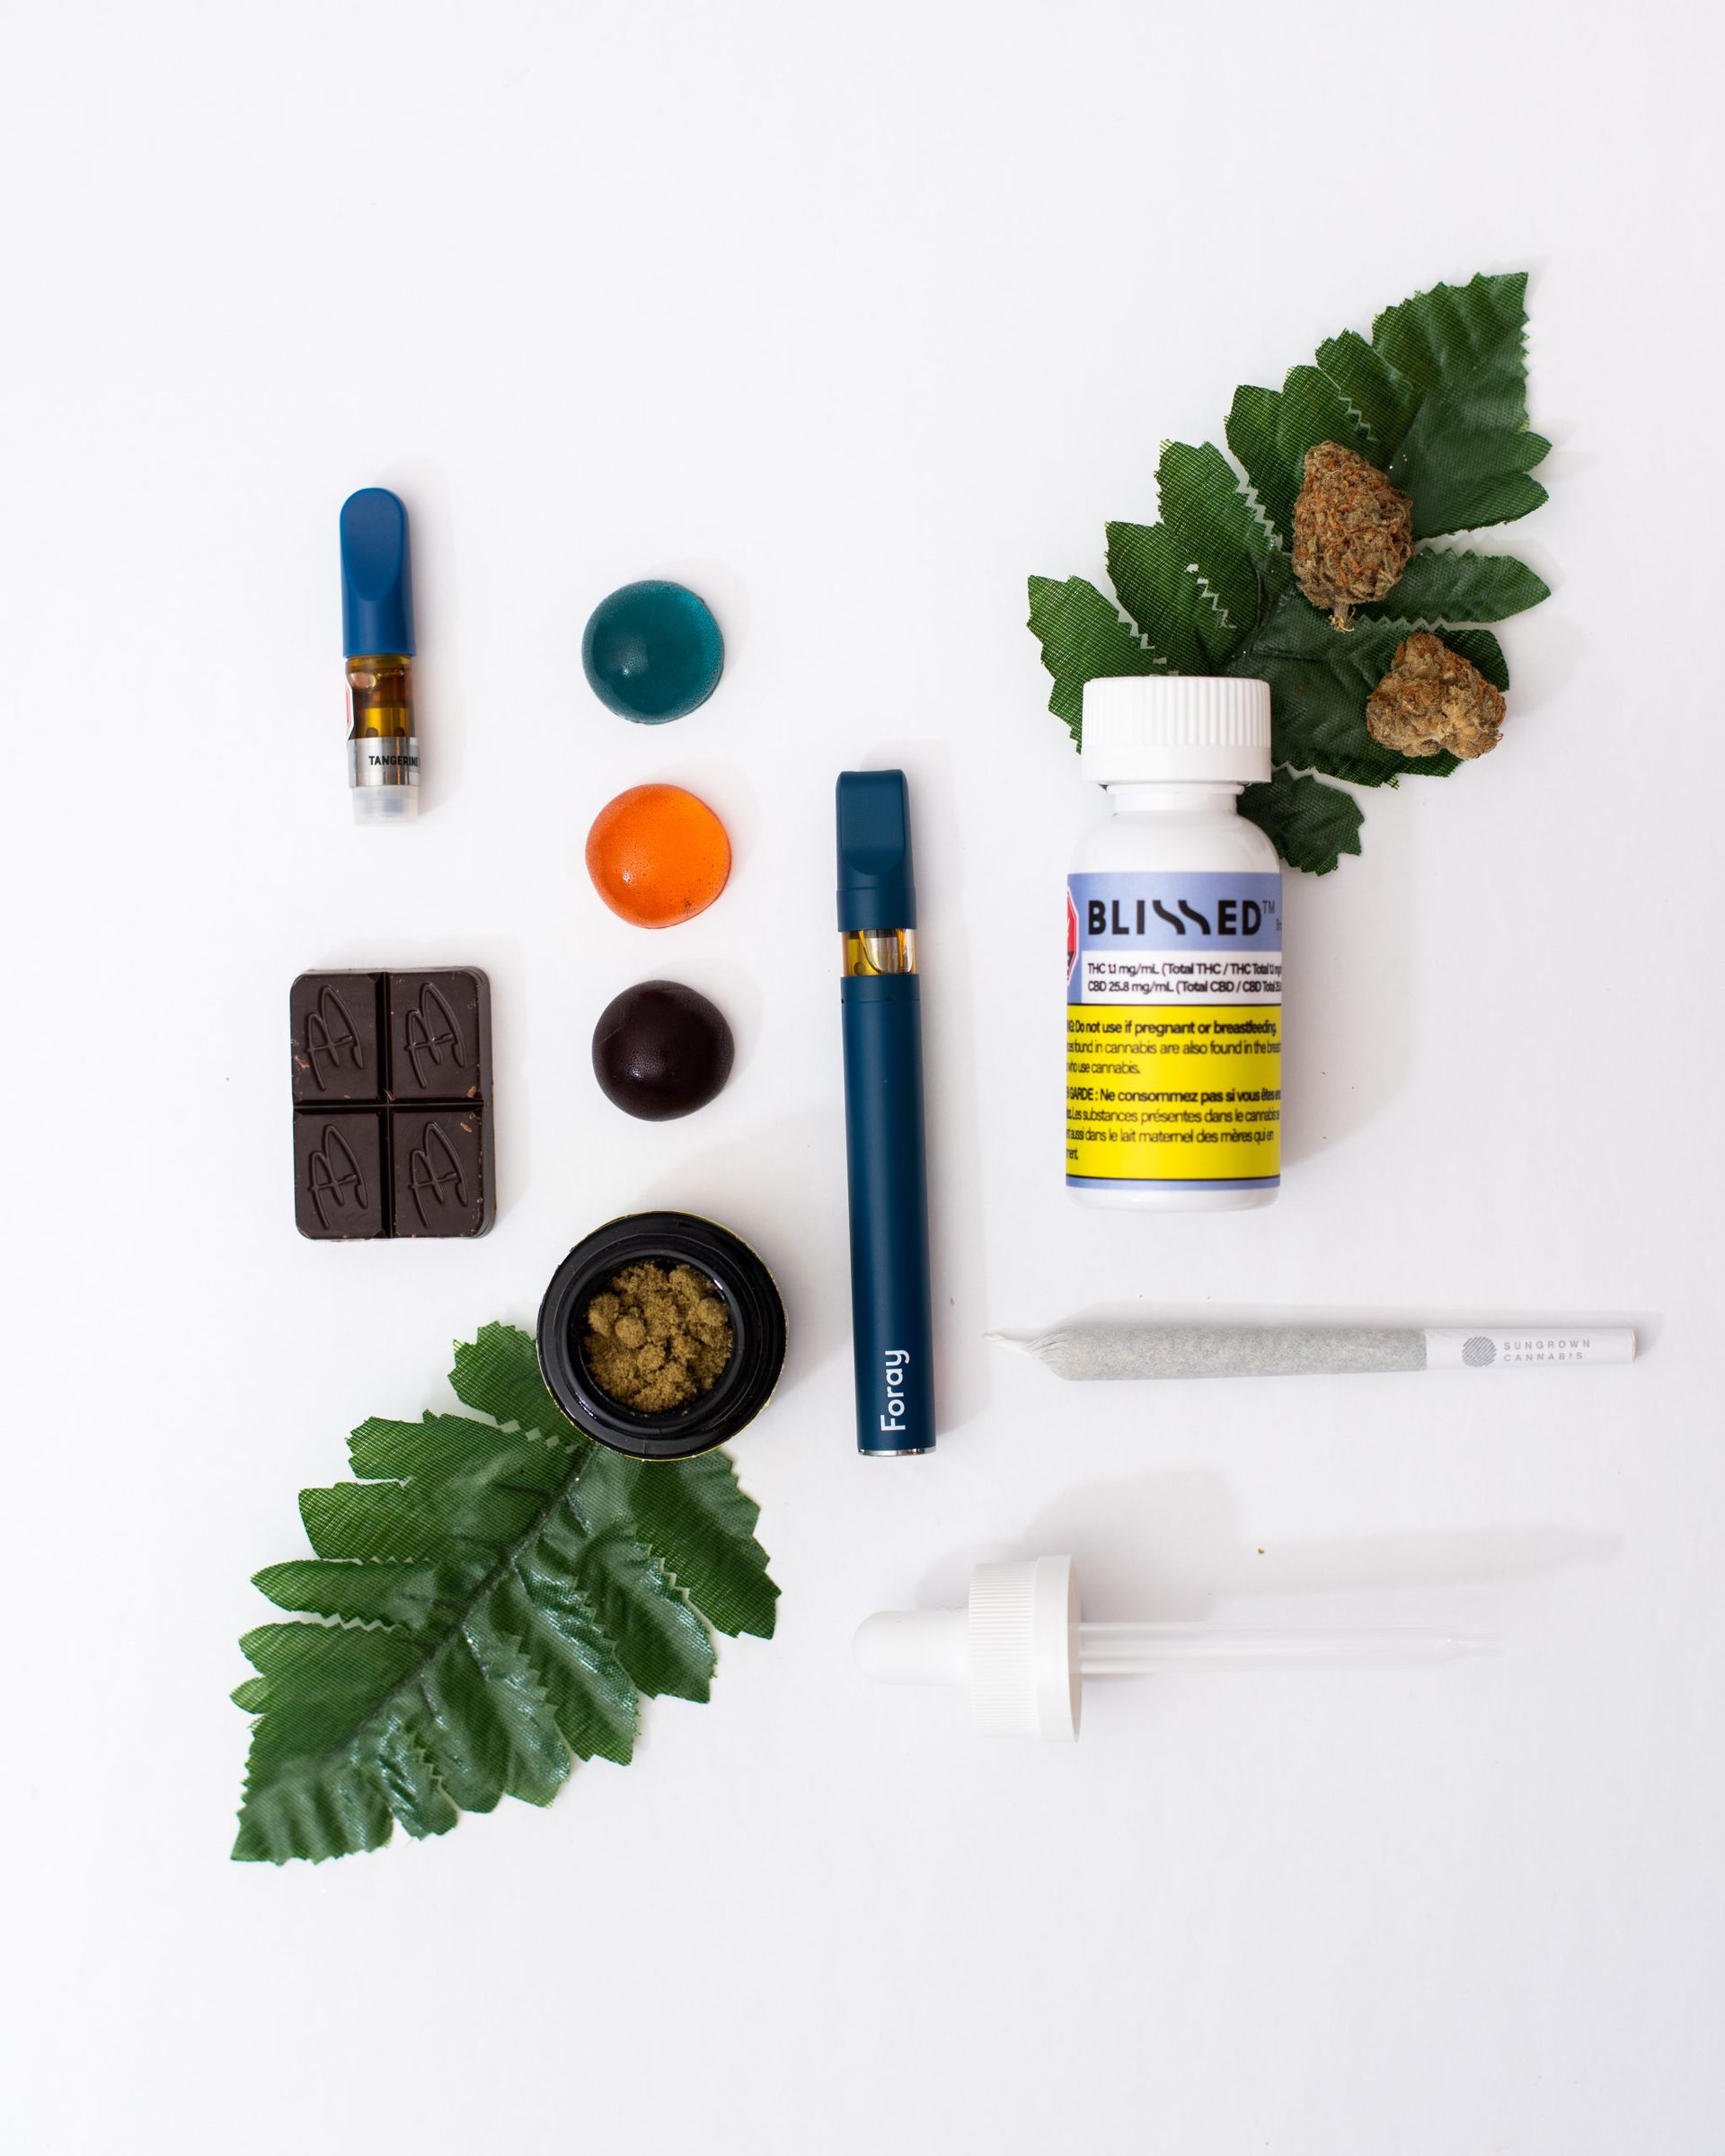 Legal Cannabis Products